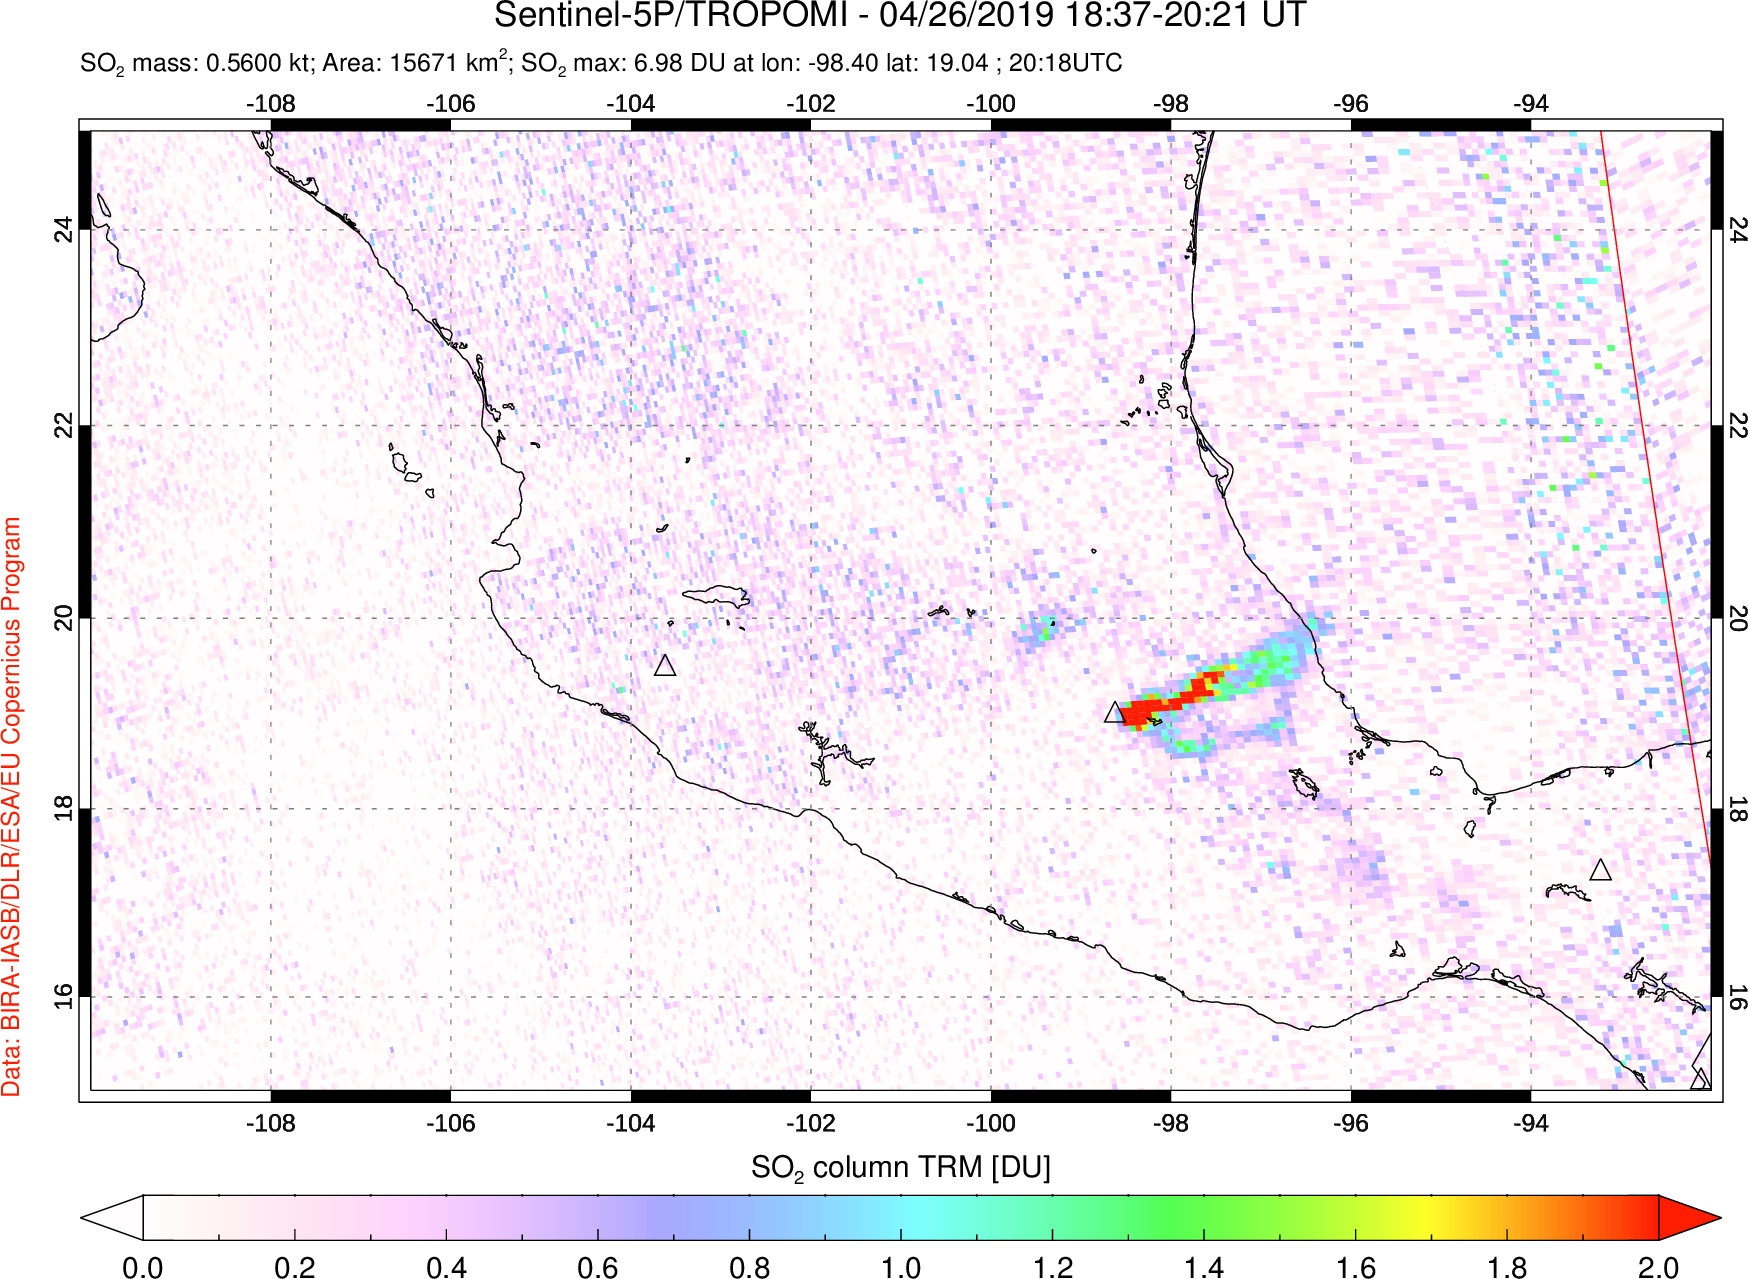 A sulfur dioxide image over Mexico on Apr 26, 2019.